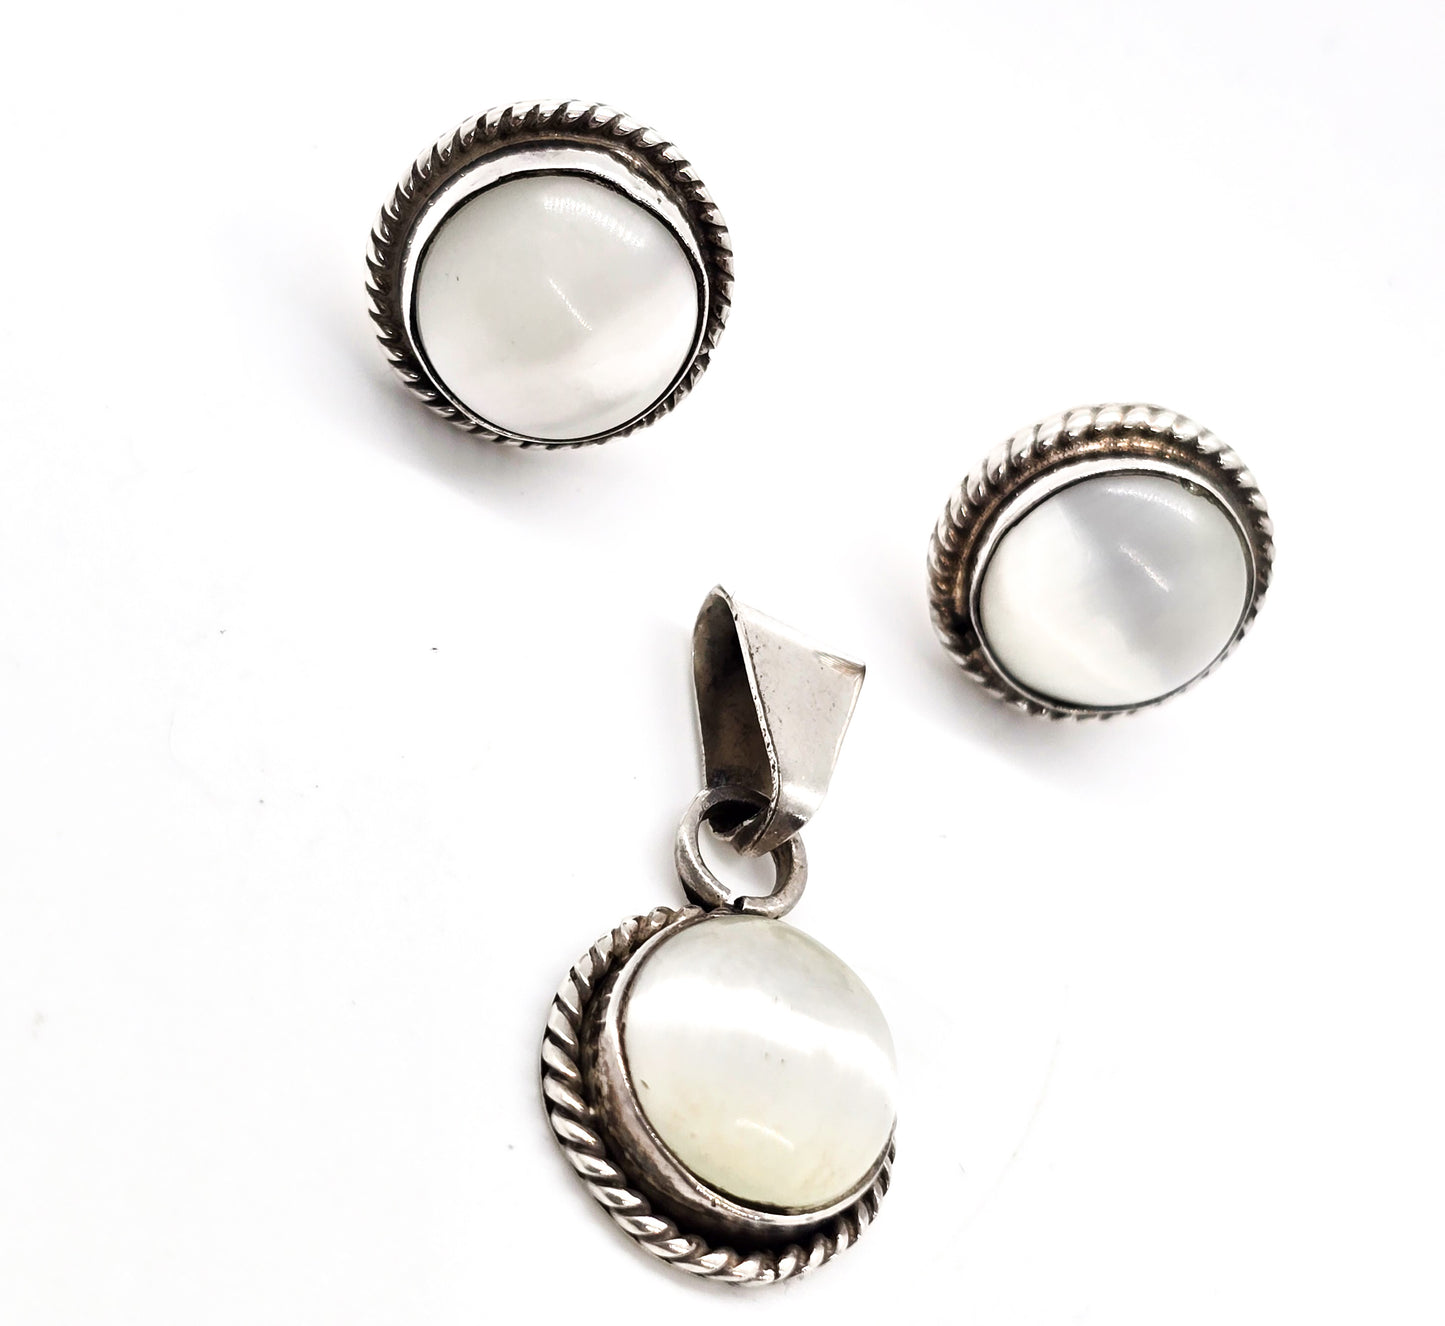 White Mother of Pearl MOP matching sterling silver earrings and pendant set